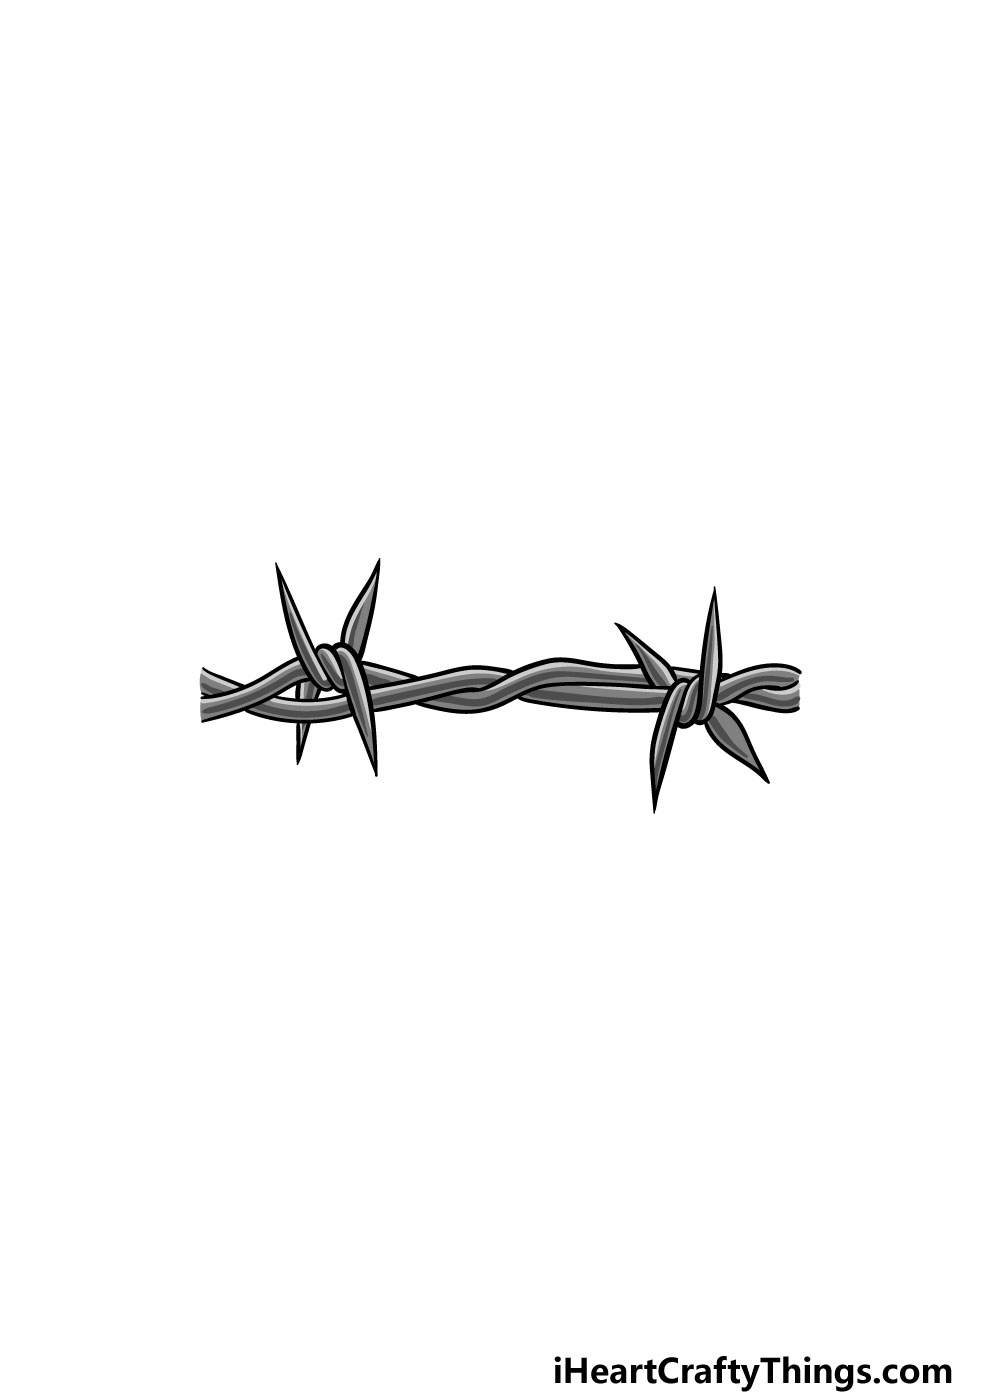 Barbed Wire Drawing - How To Draw Barbed Wire Step By Step. 